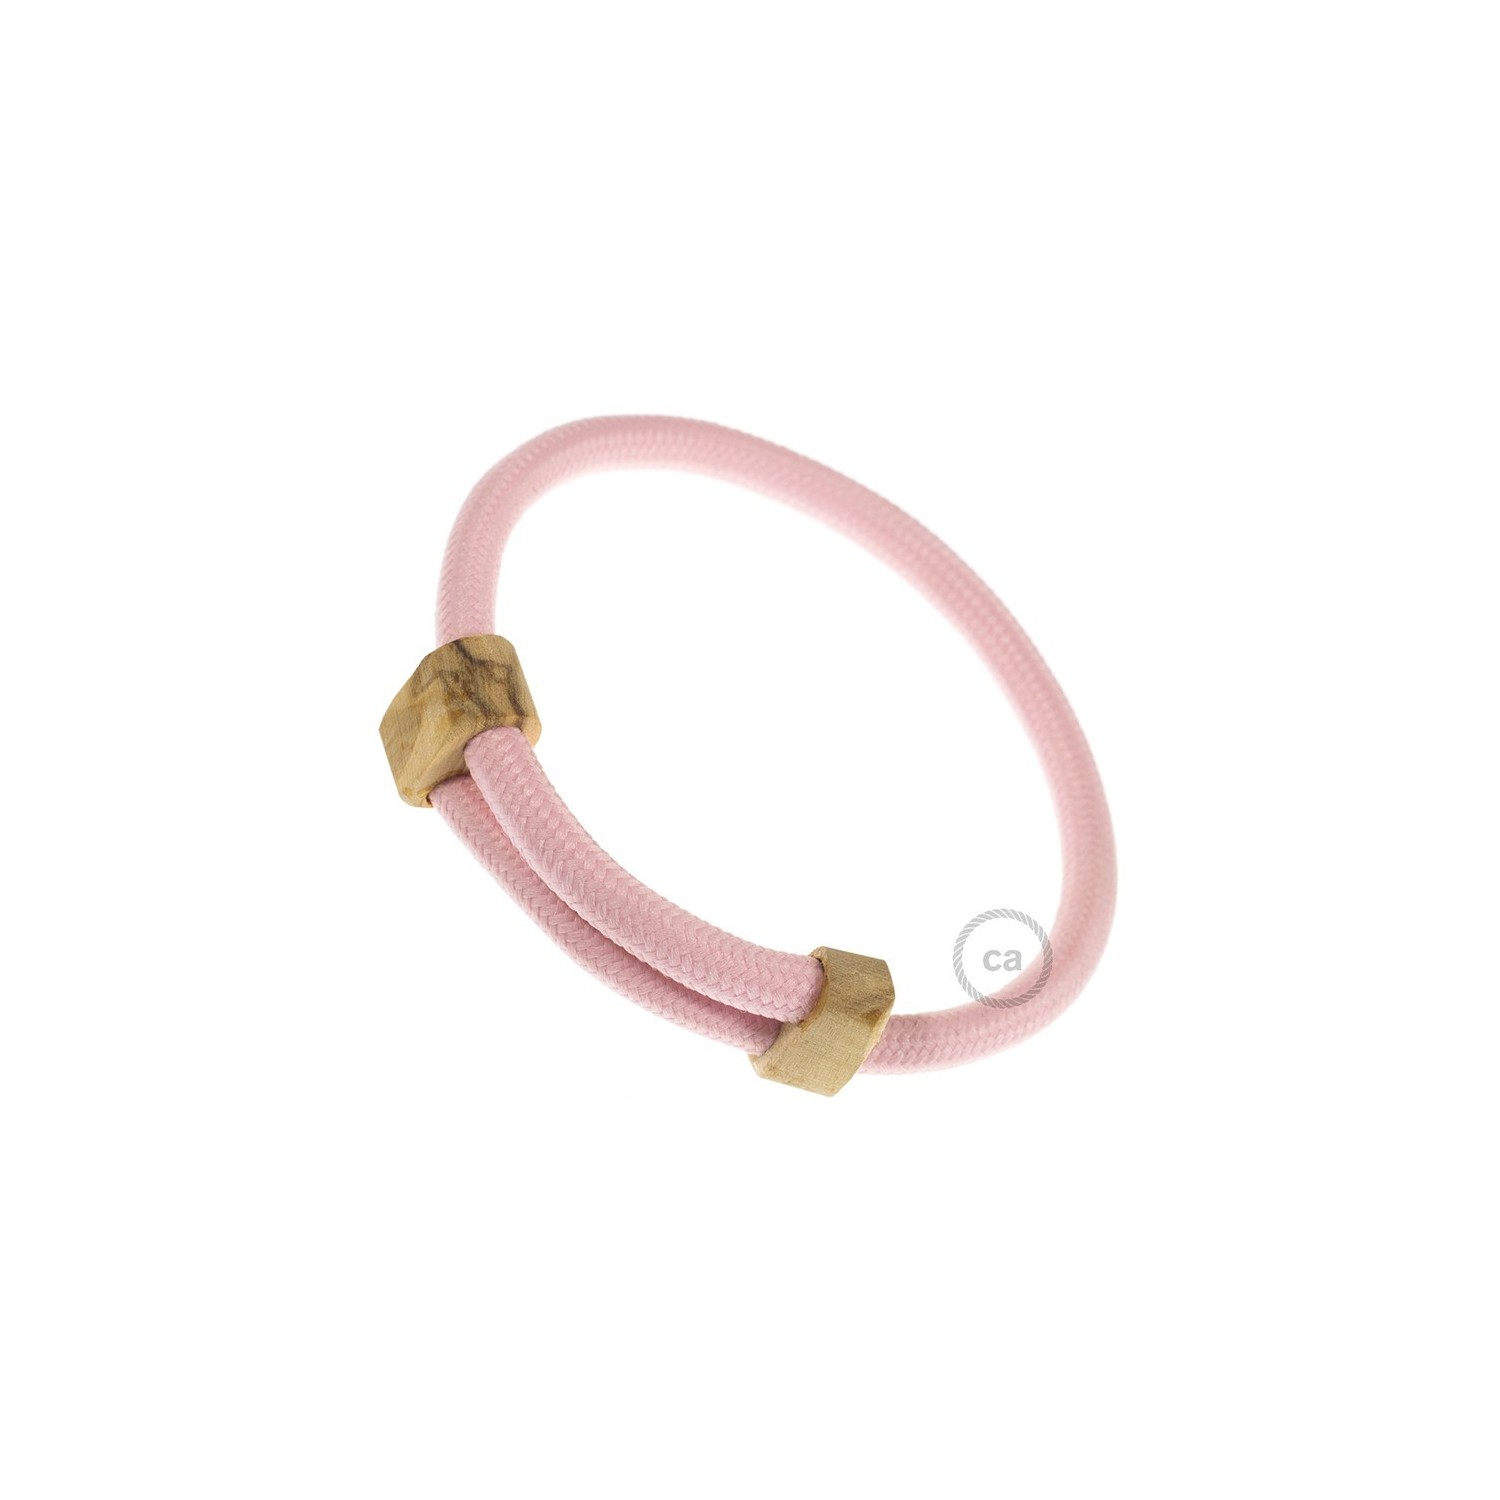 Creative-Bracelet inRayon solid color baby pink fabric RM16. Wood sliding fastening. Made in Italy.